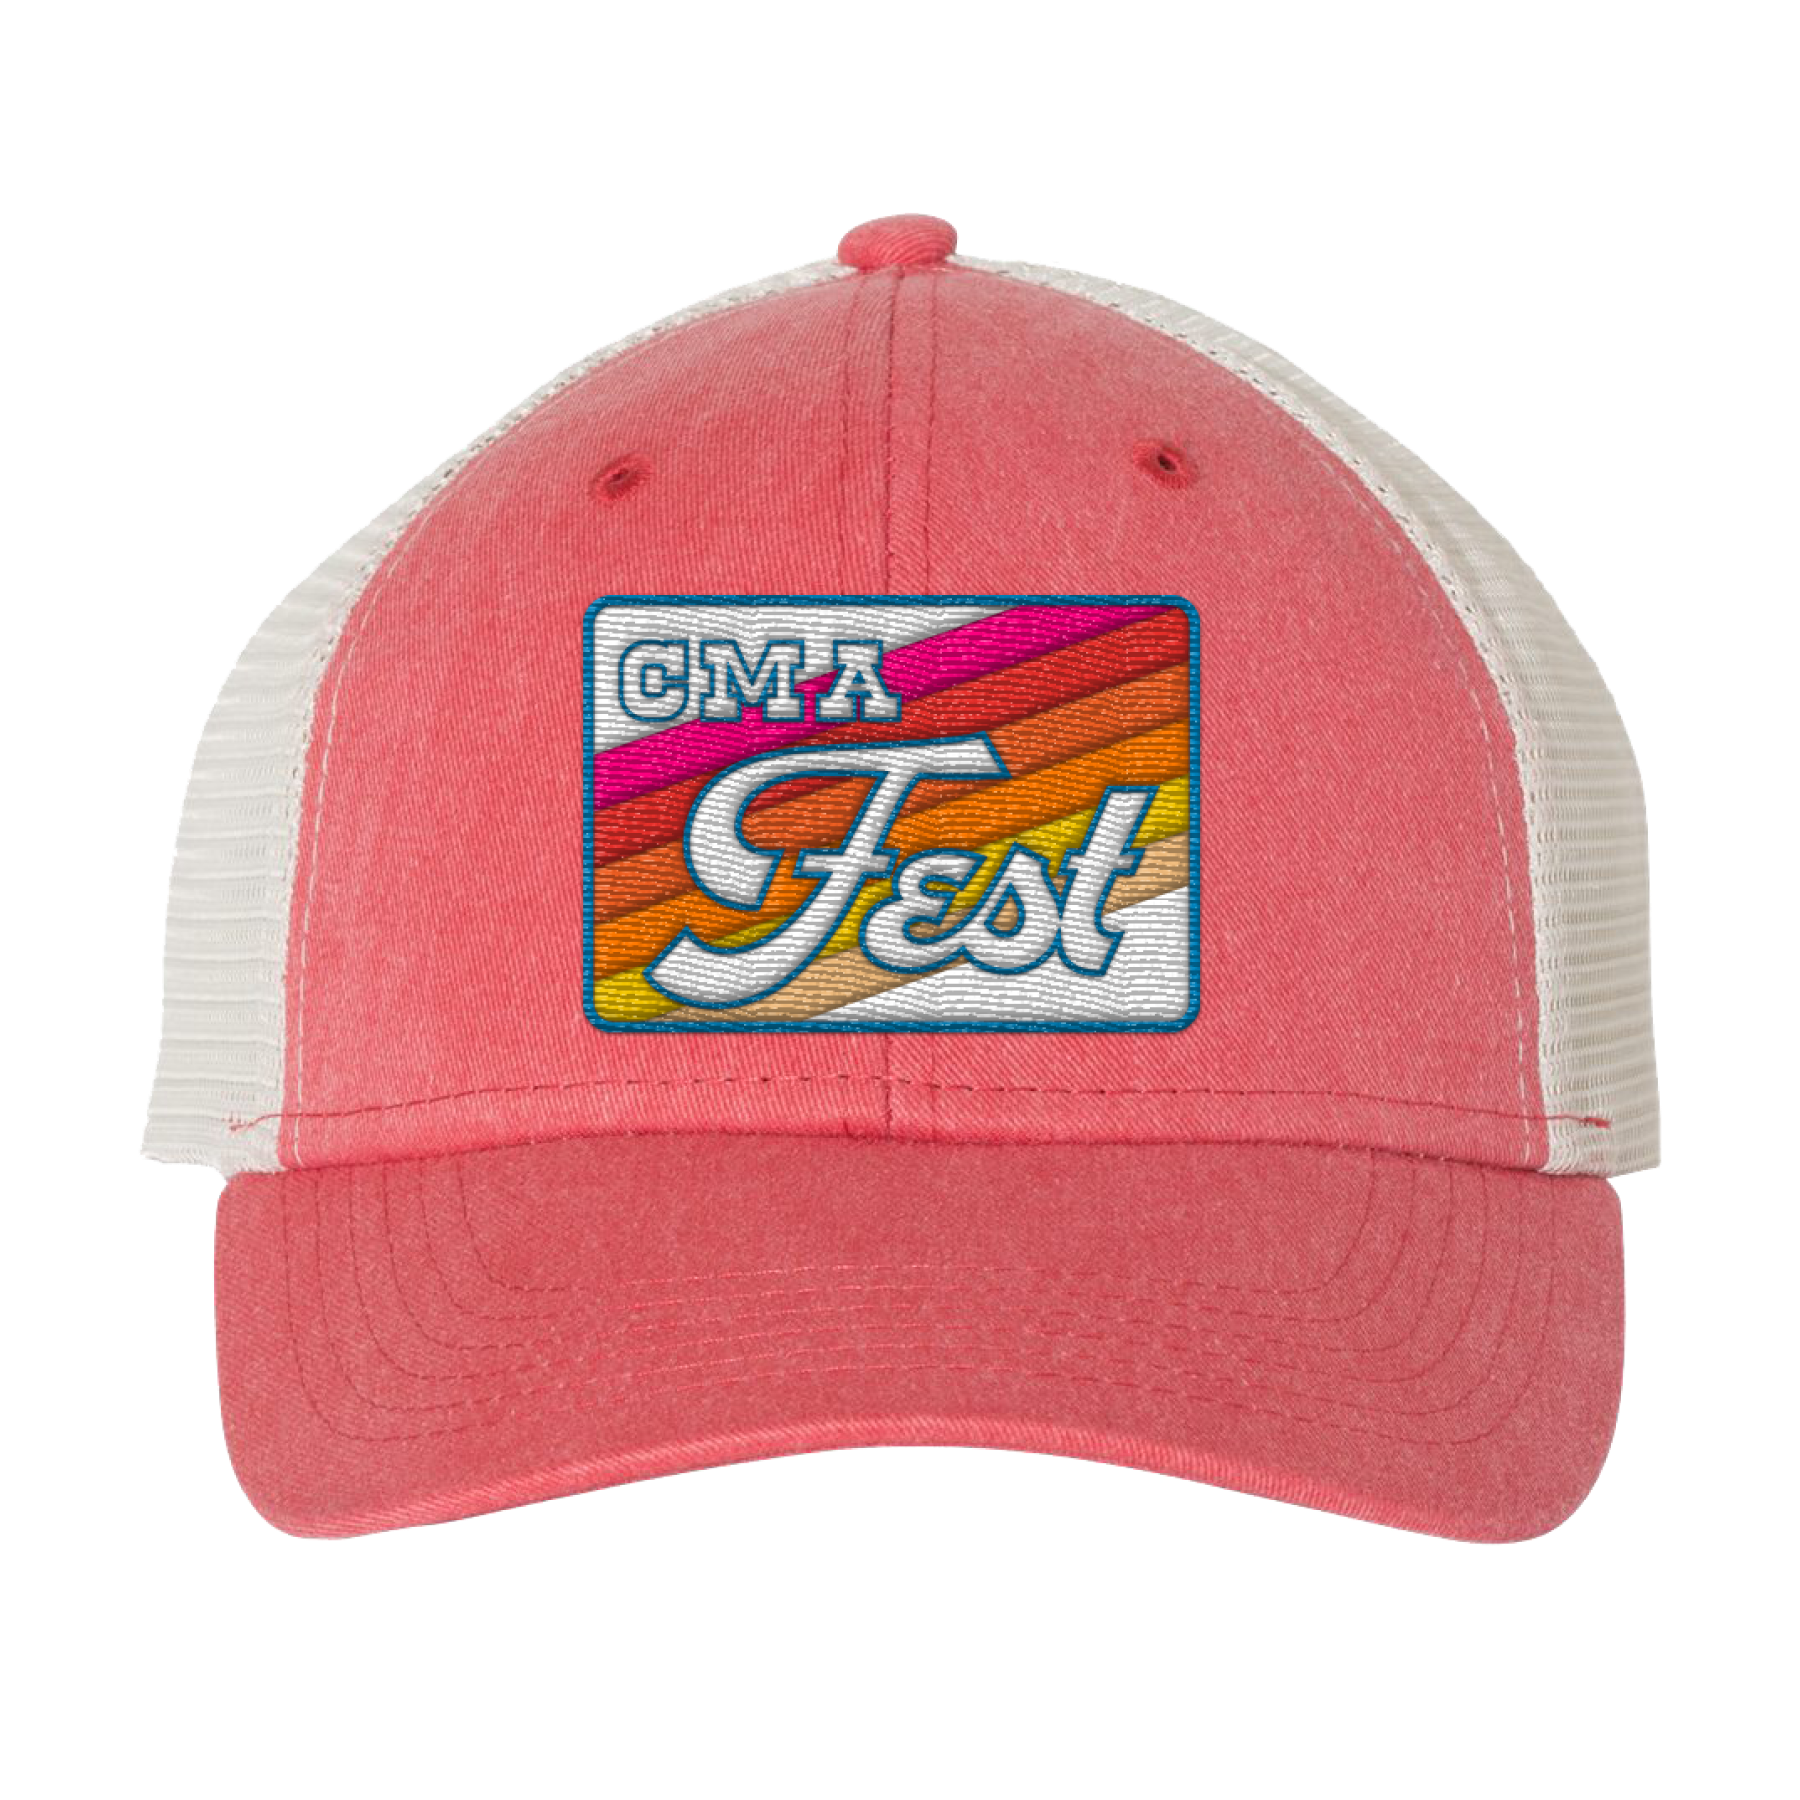 Official CMA Fest Merchandise. Red hat with retro design patch